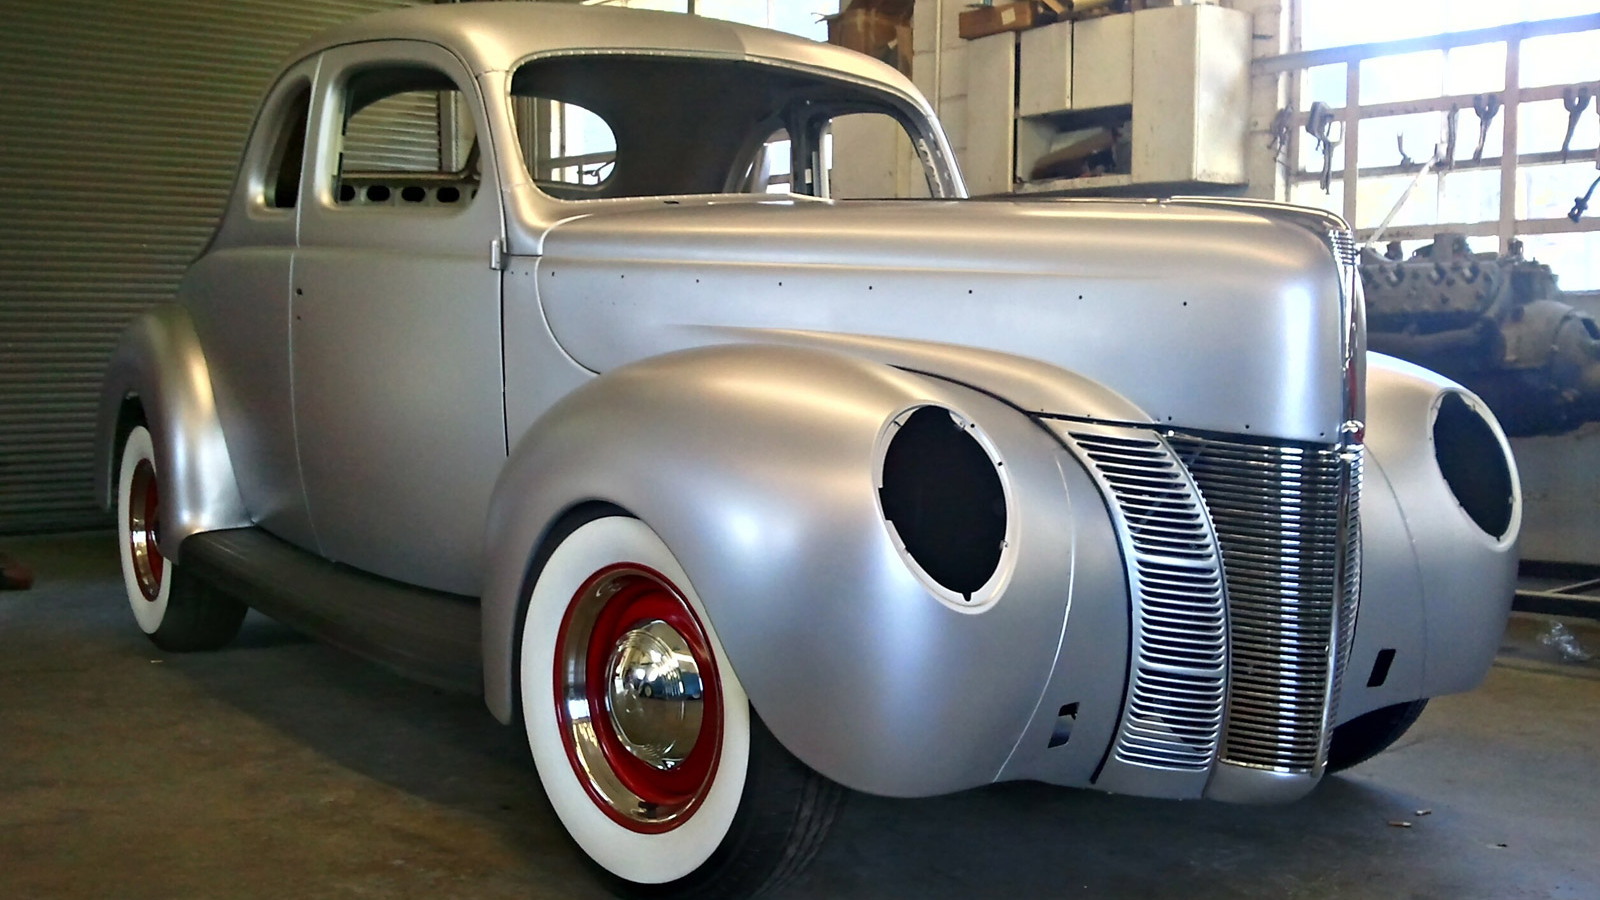 1940 Ford Coupe officially licensed reproduction body shell